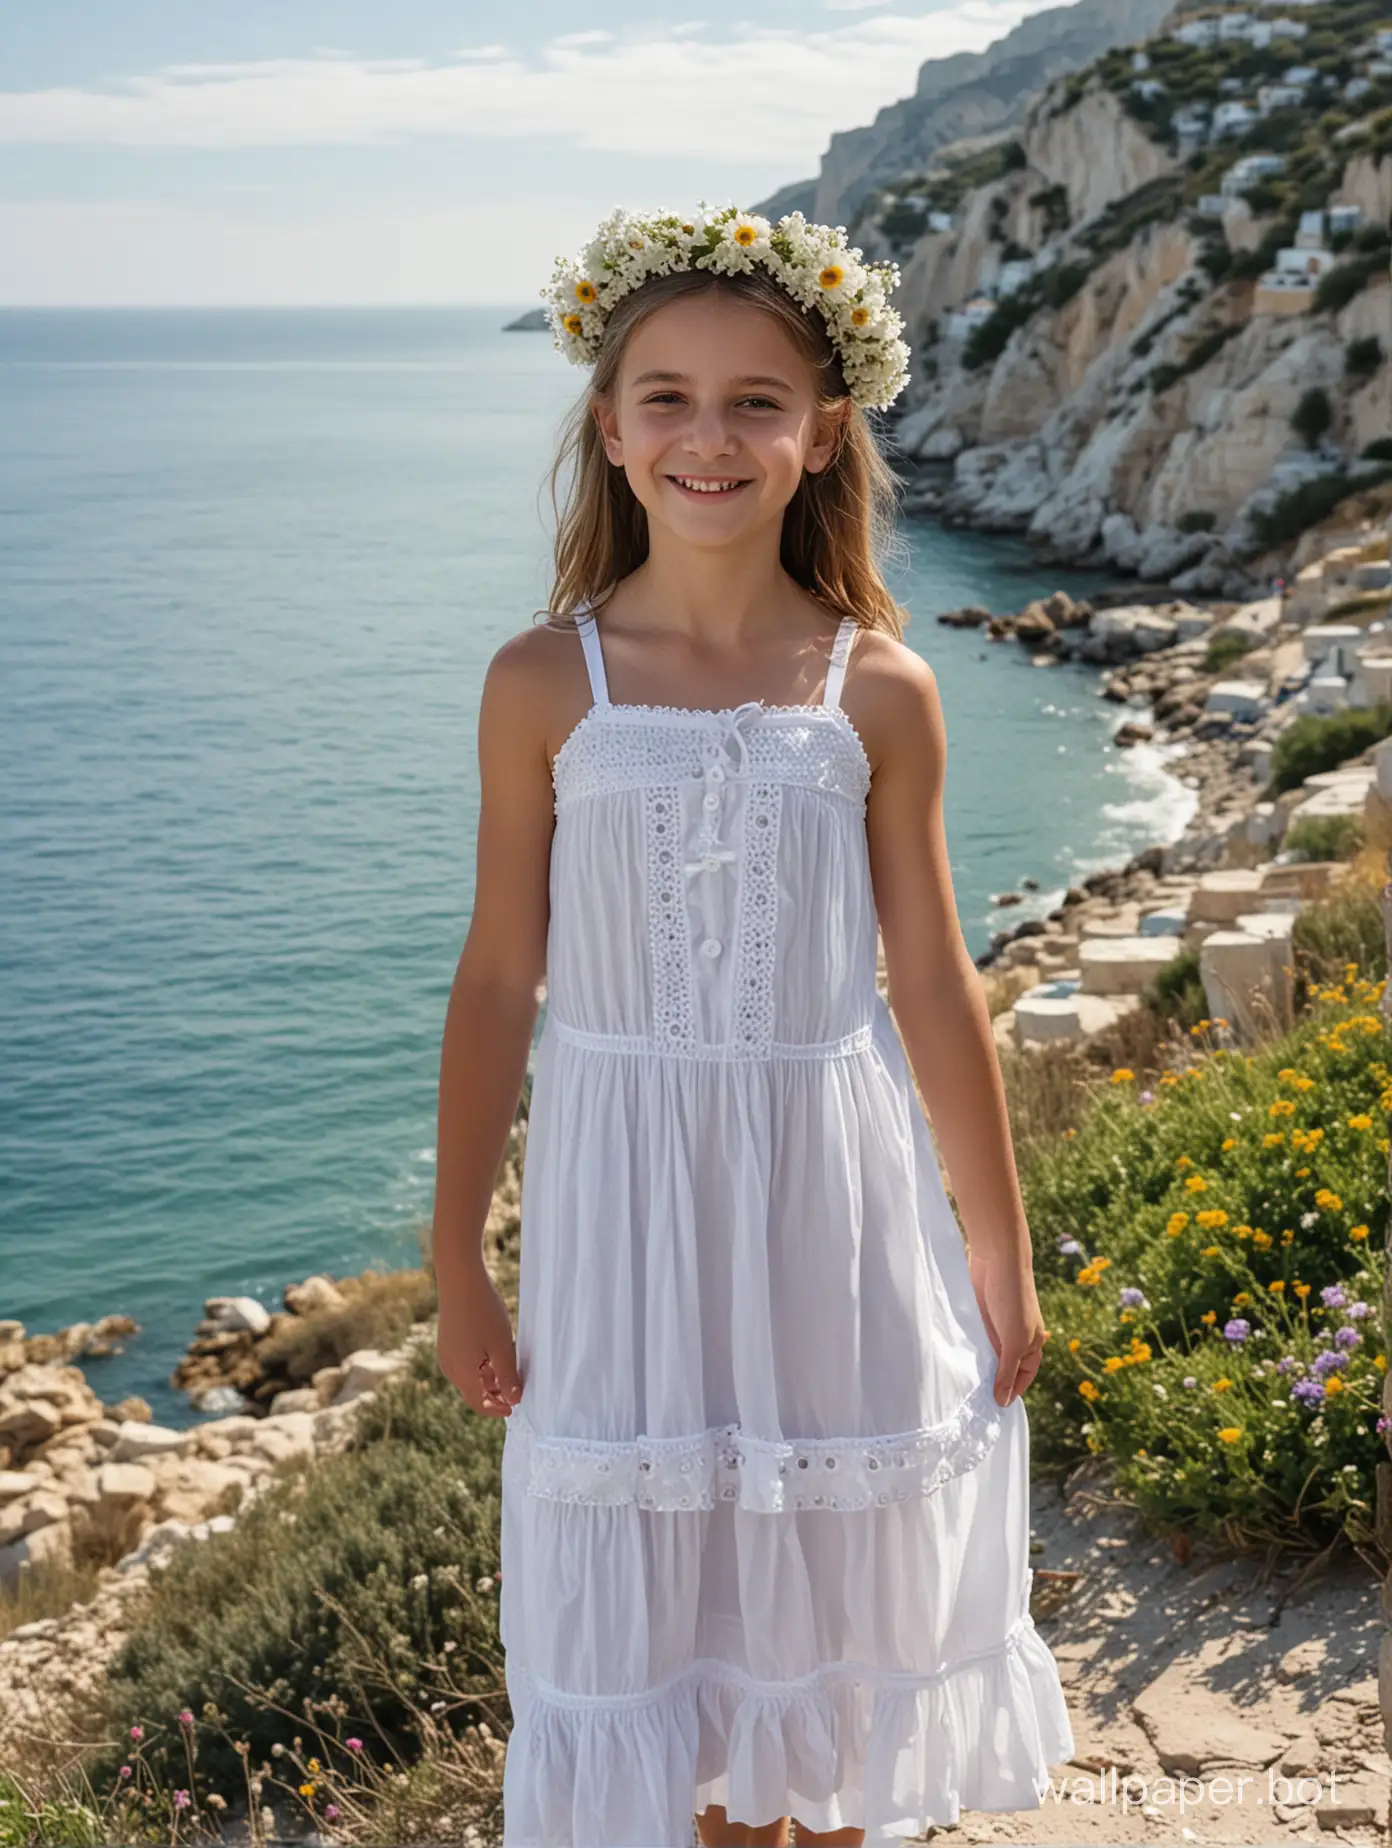 Smiling-11YearOld-Girl-in-Crimea-with-Flower-Wreath-and-Sea-View